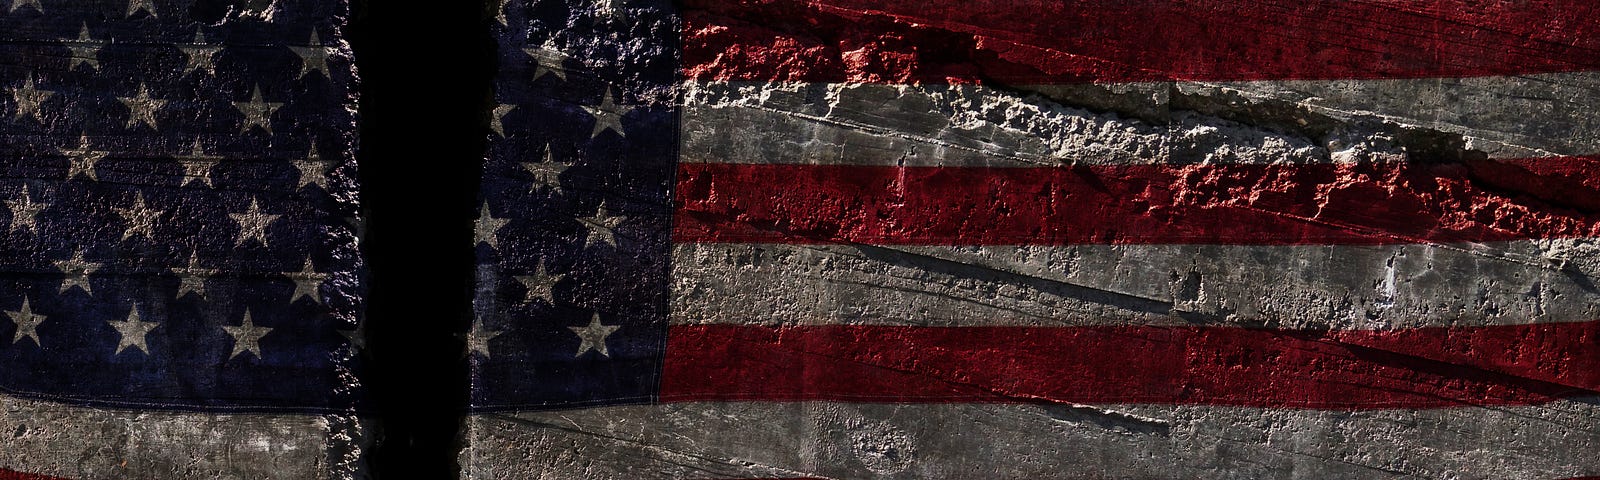 A distressed US flag illustrating the disunity in America